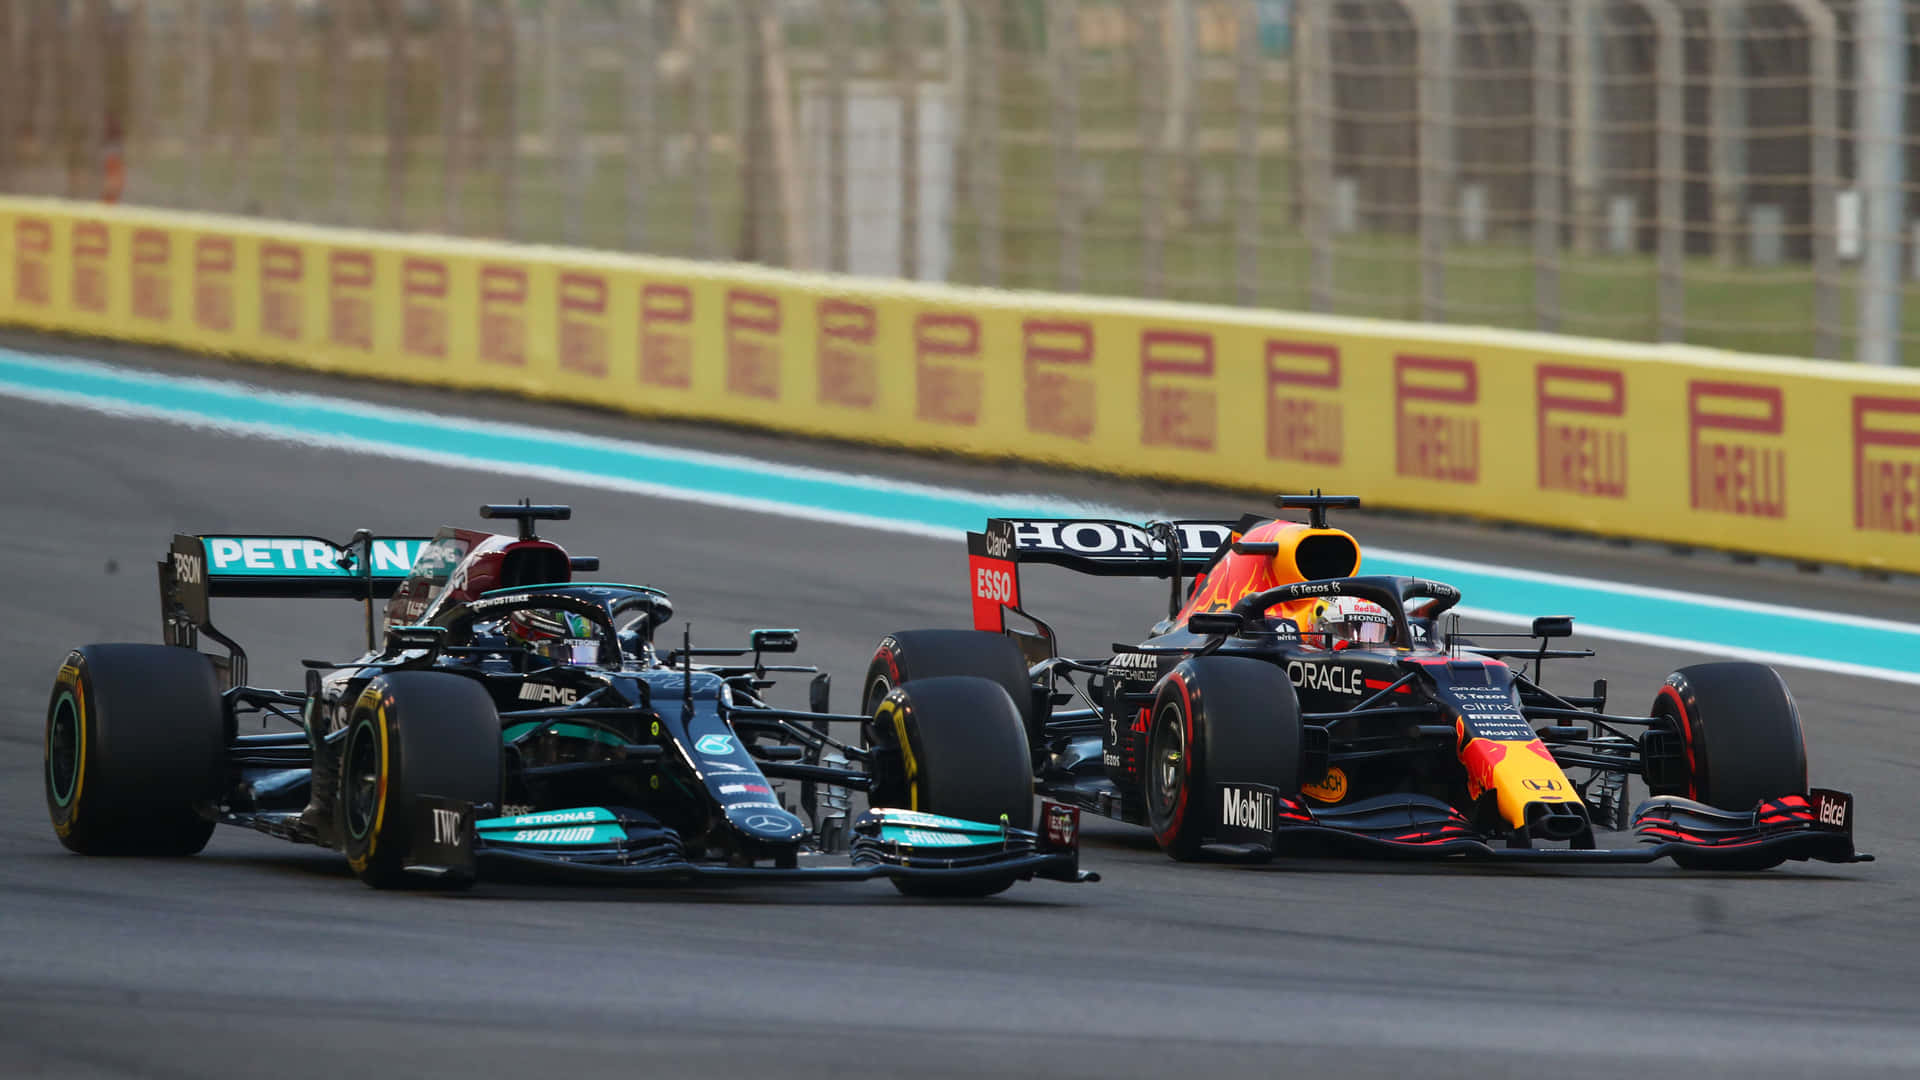 Get ready for an action-packed season of Formula 1 2019